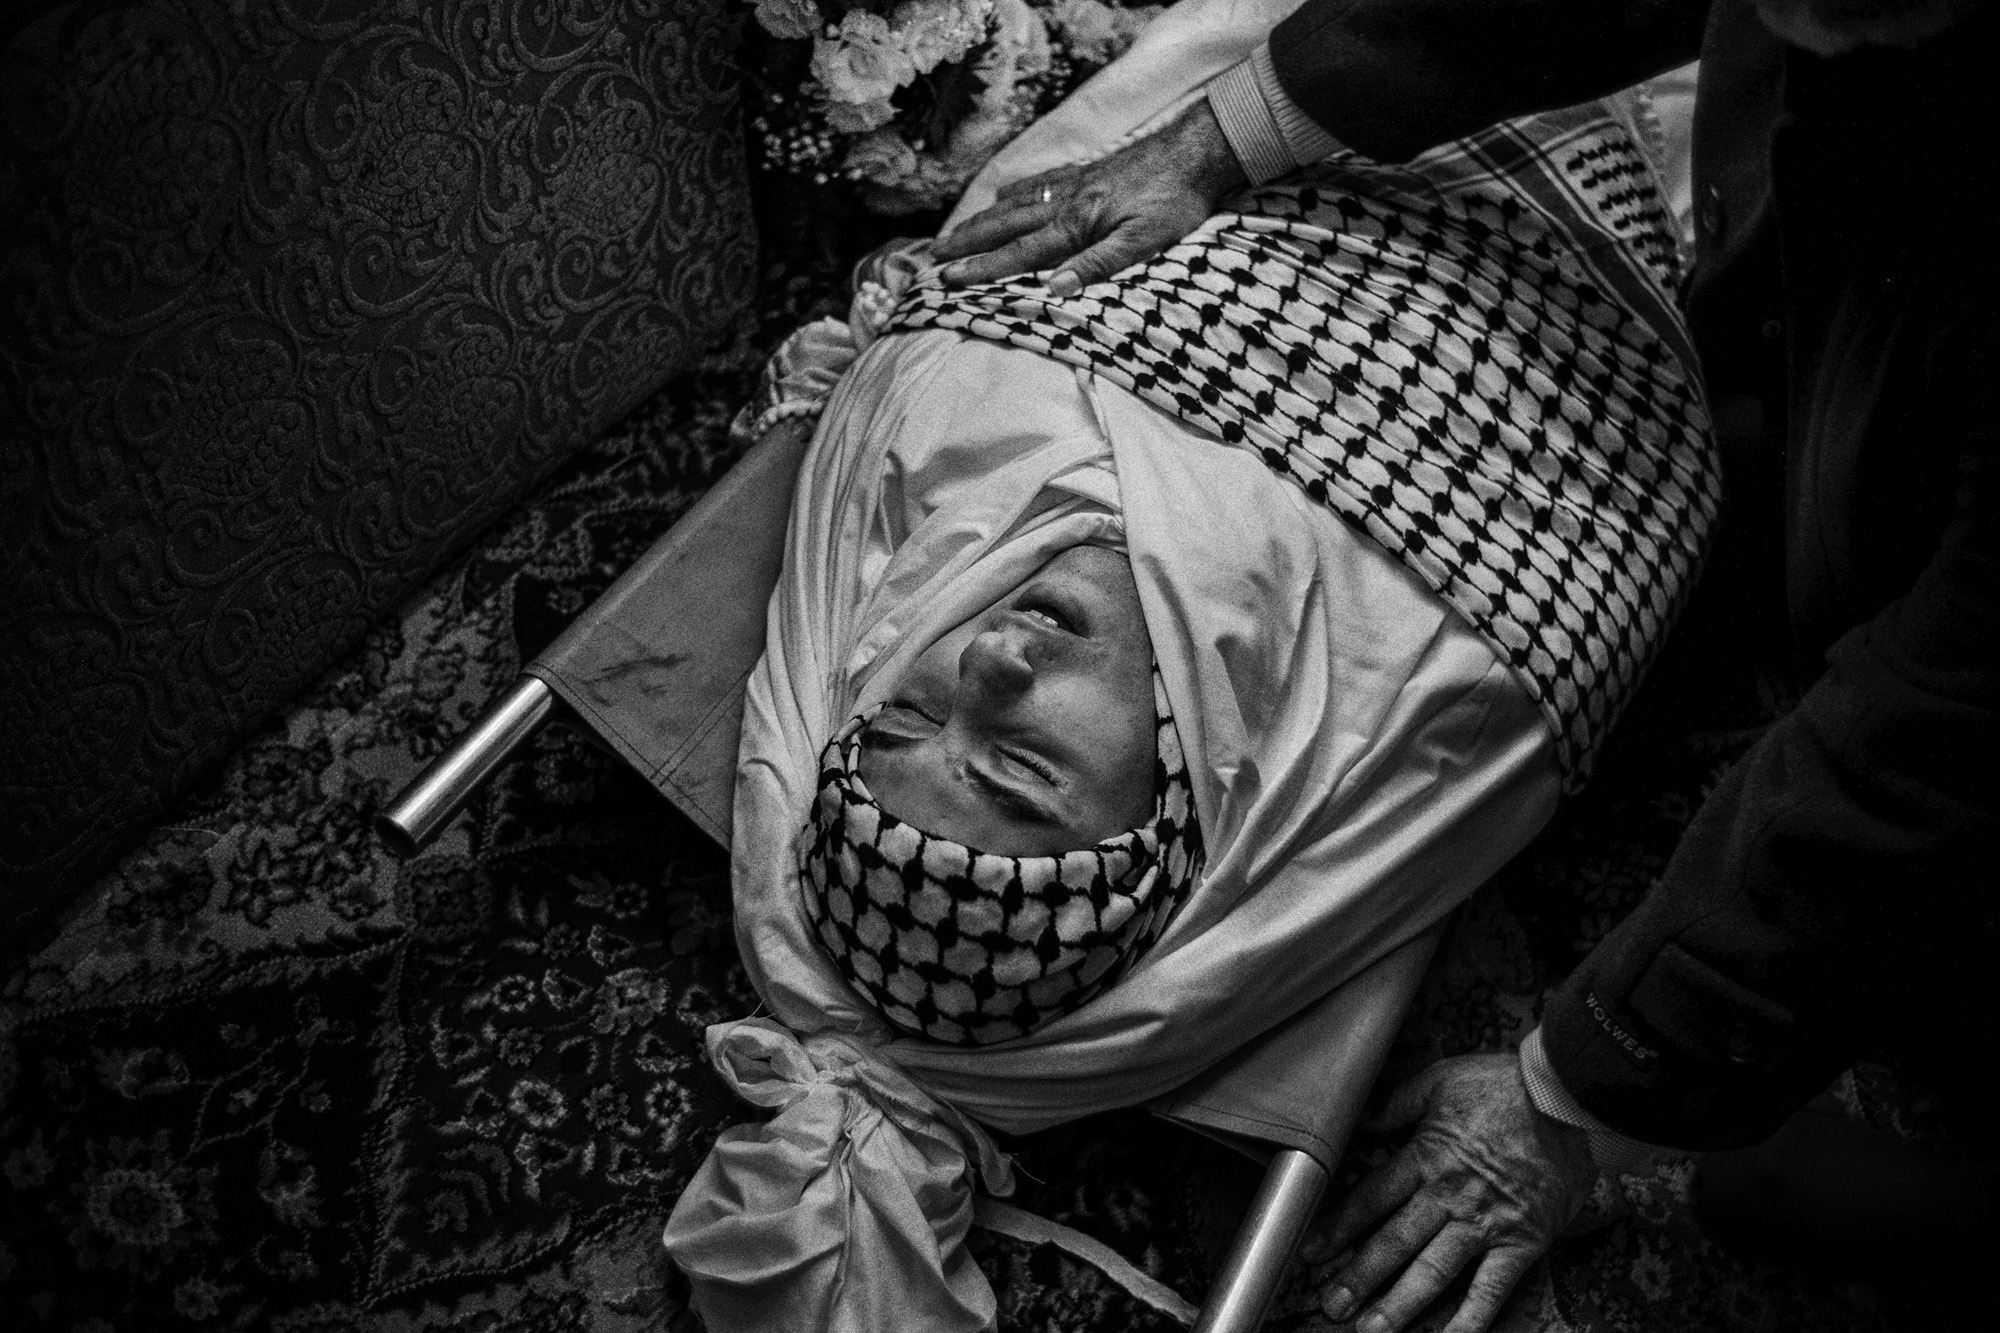 Shadi Arafa, a Palestinian mobile phone salesman who was killed during an attack in Gush Etzion, south of Jerusalem, is mourned in Hebron, November 2015. Israel's Ministry of Foreign Affairs stated Arafa was killed by Palestinian gunfire, but noted that official Palestinian sources said he was killed by Israeli forces.